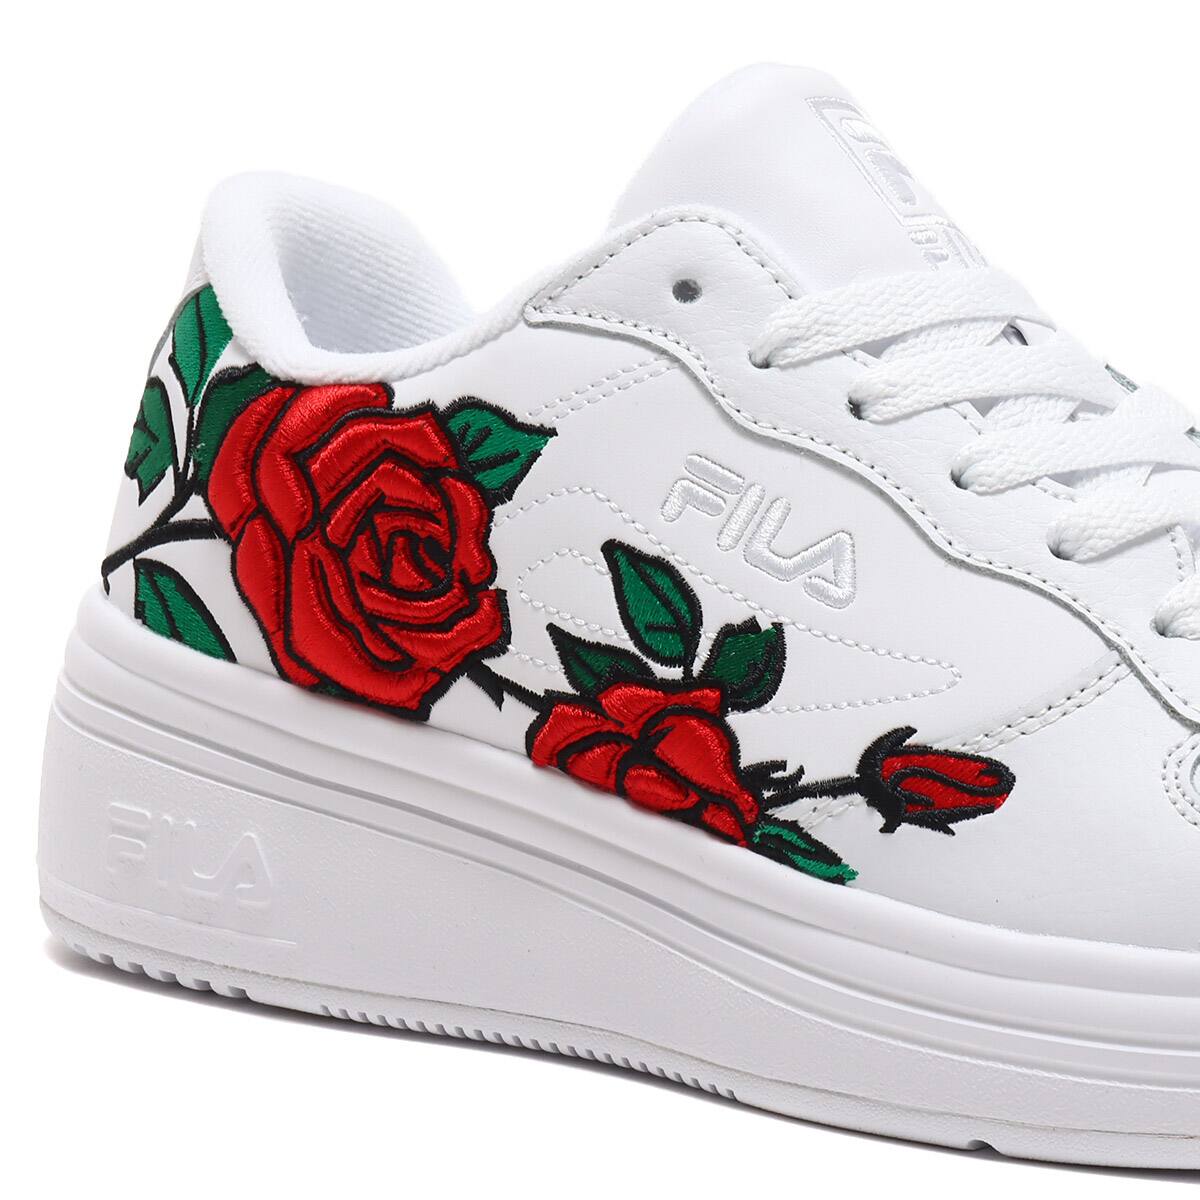 FILA WX-100 FLORAL White/Fila Red/Jelly Bean 23SS-I